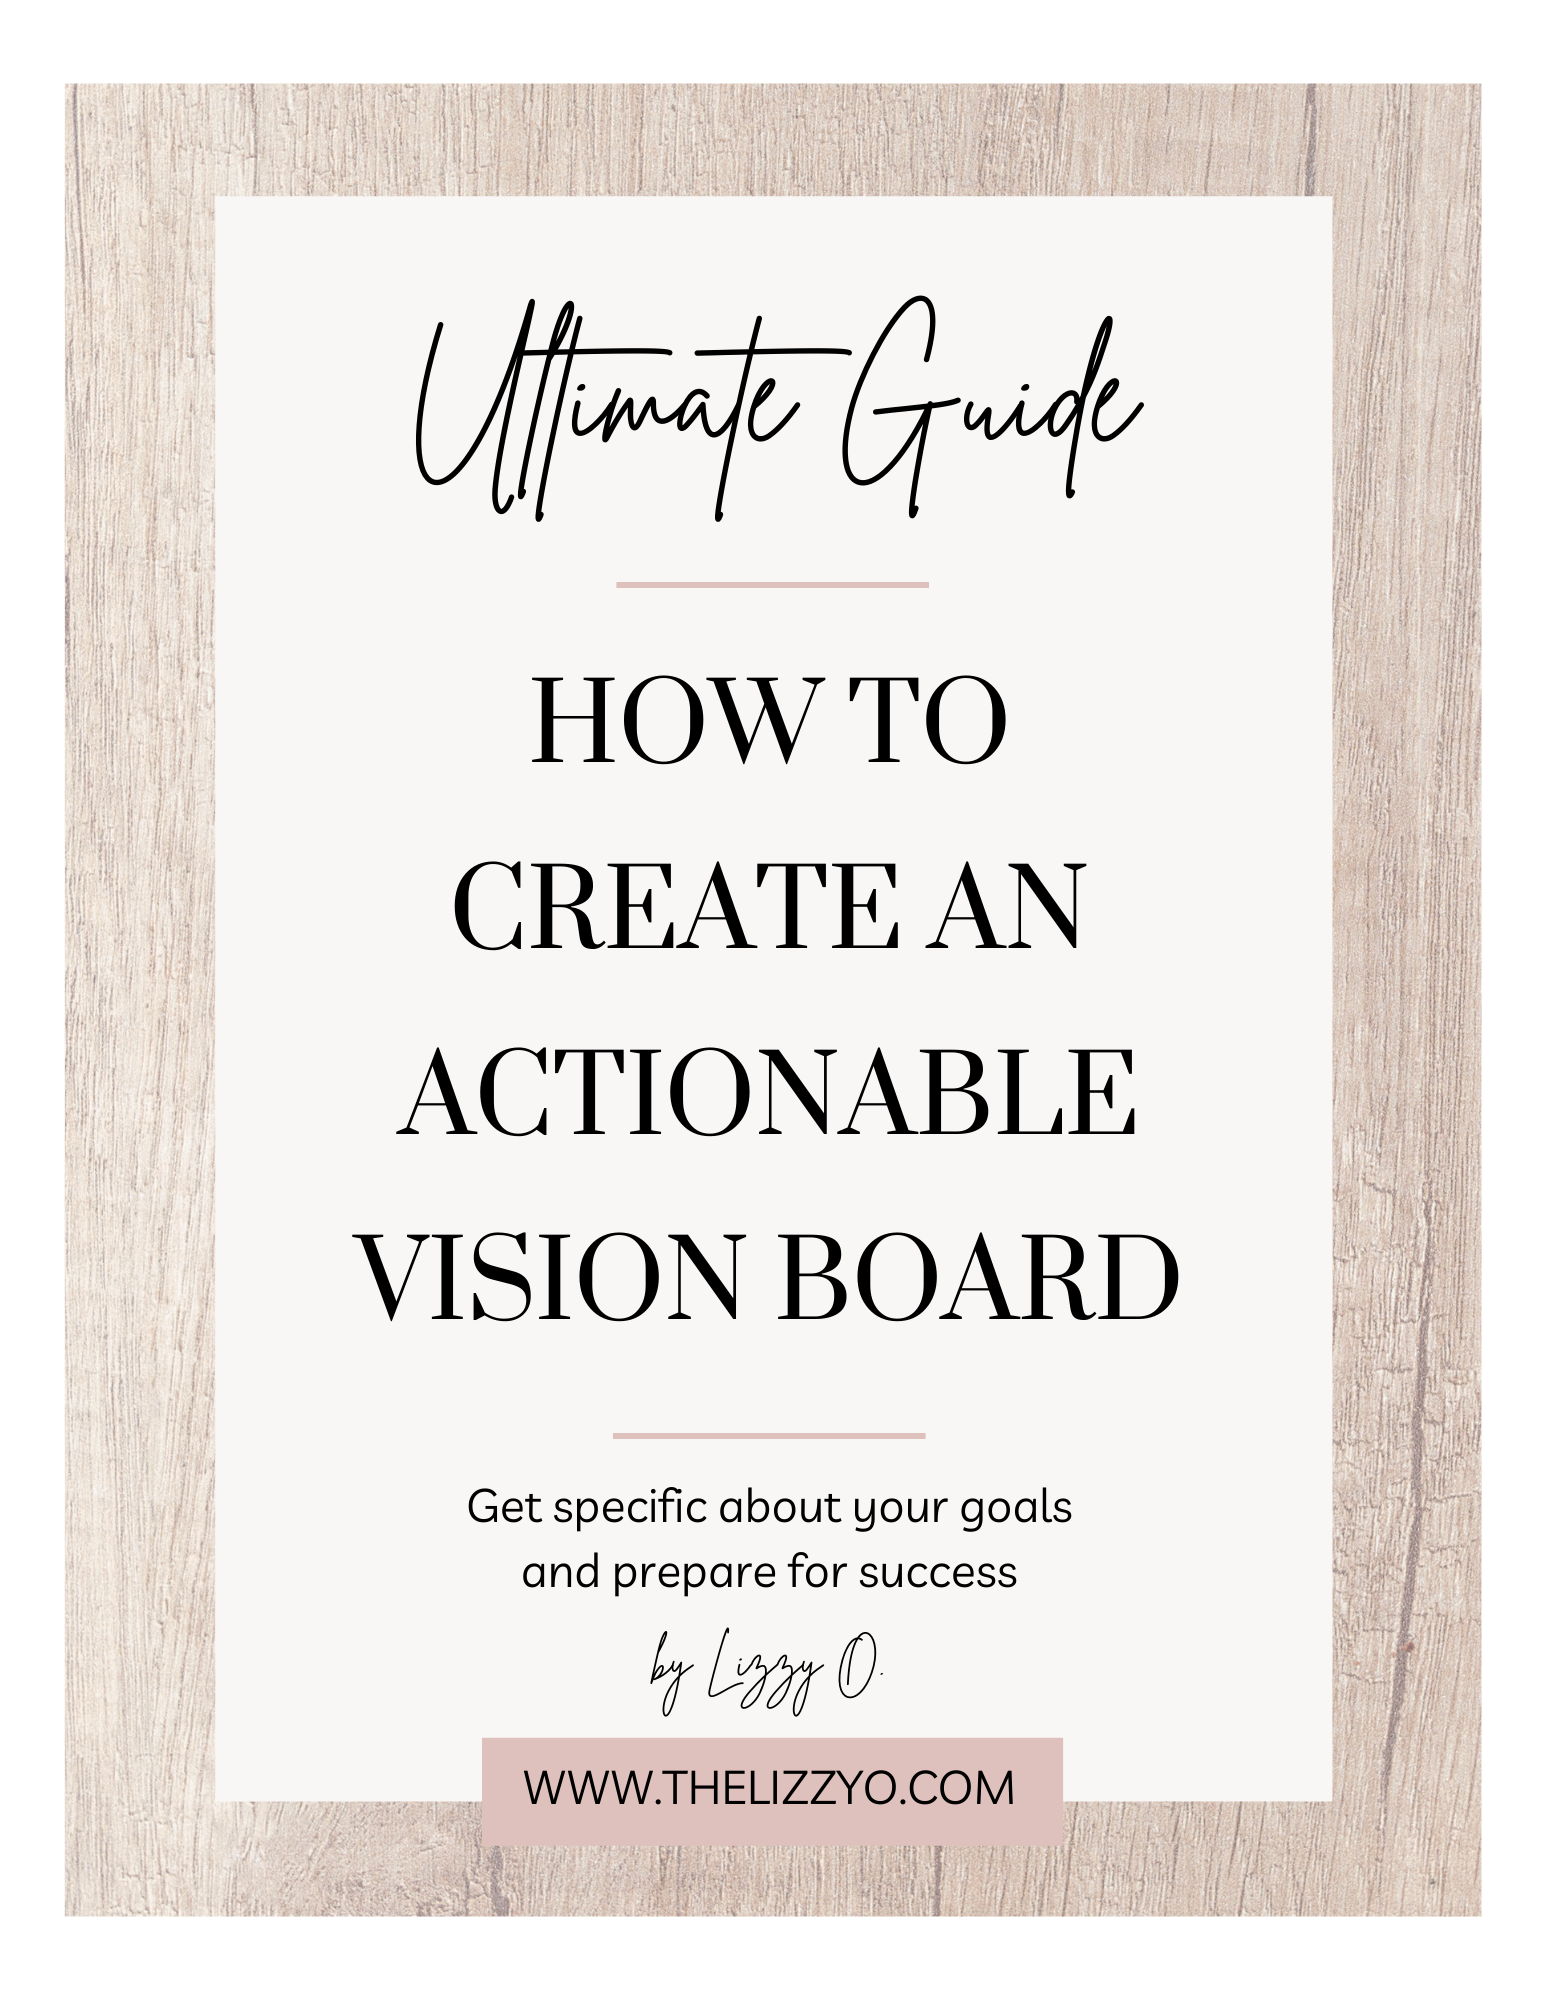 How to Make a Vision Board - The Ultimate Guide to Making Vision Boards 